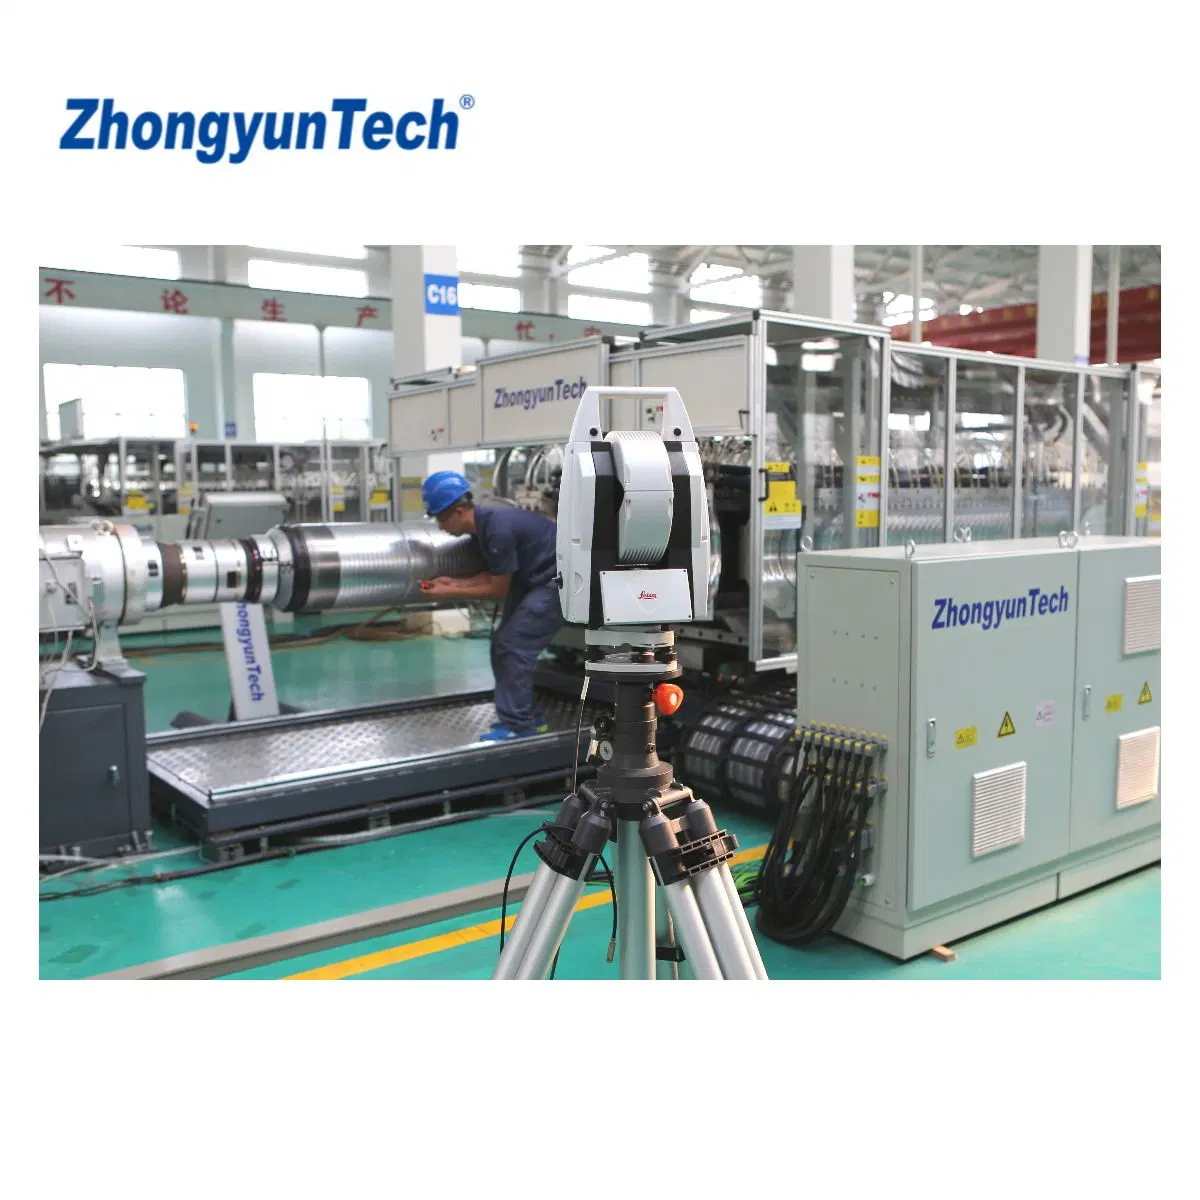 PP/PVC Plastic Corrugated Pipe Production Line for Drainage/Sewege/Cable Duct/Electric Conduit